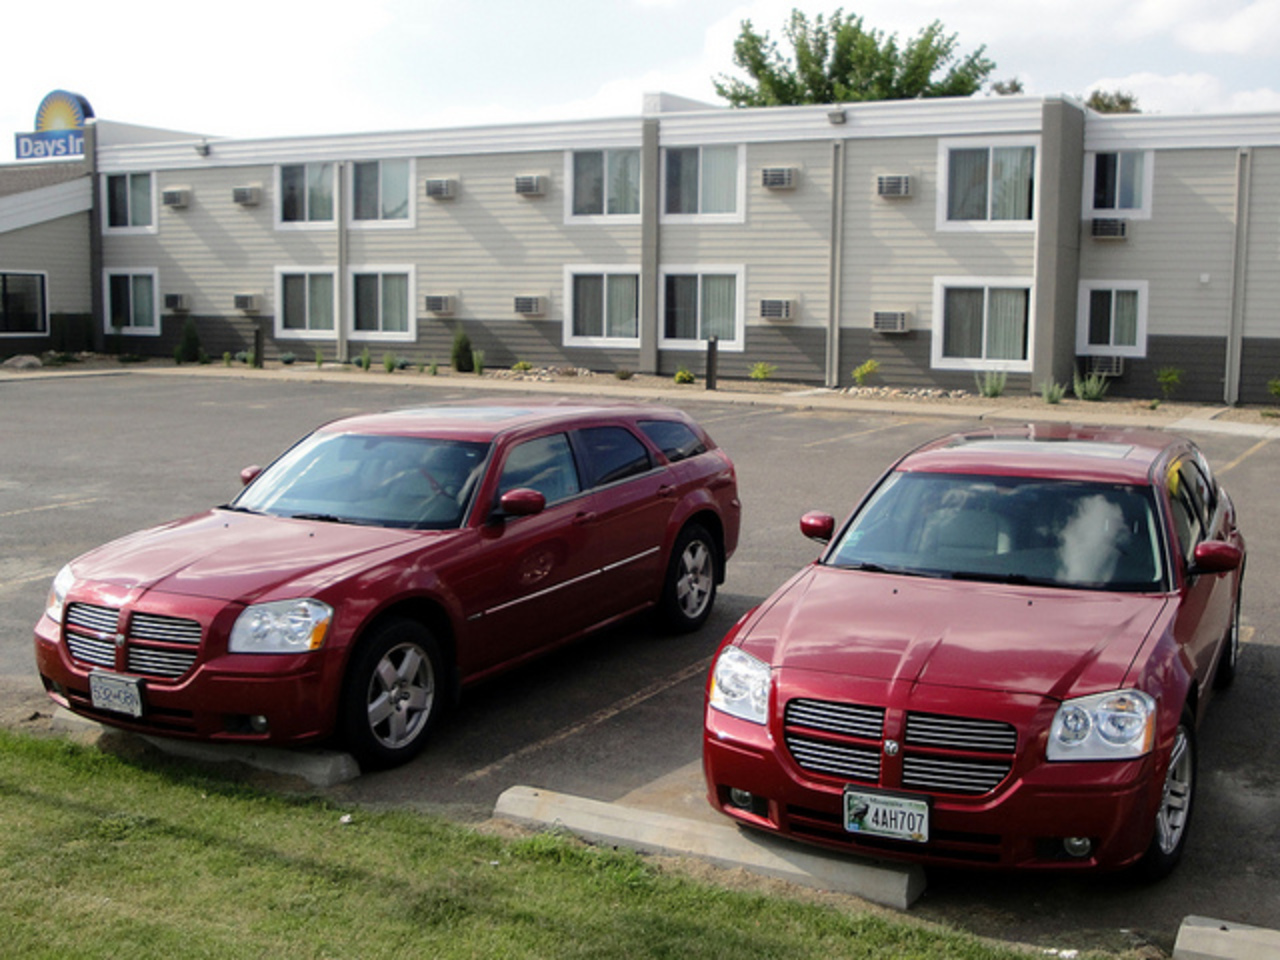 05 & 06 or 07 Dodge Magnum RT X2 | Flickr - Photo Sharing!